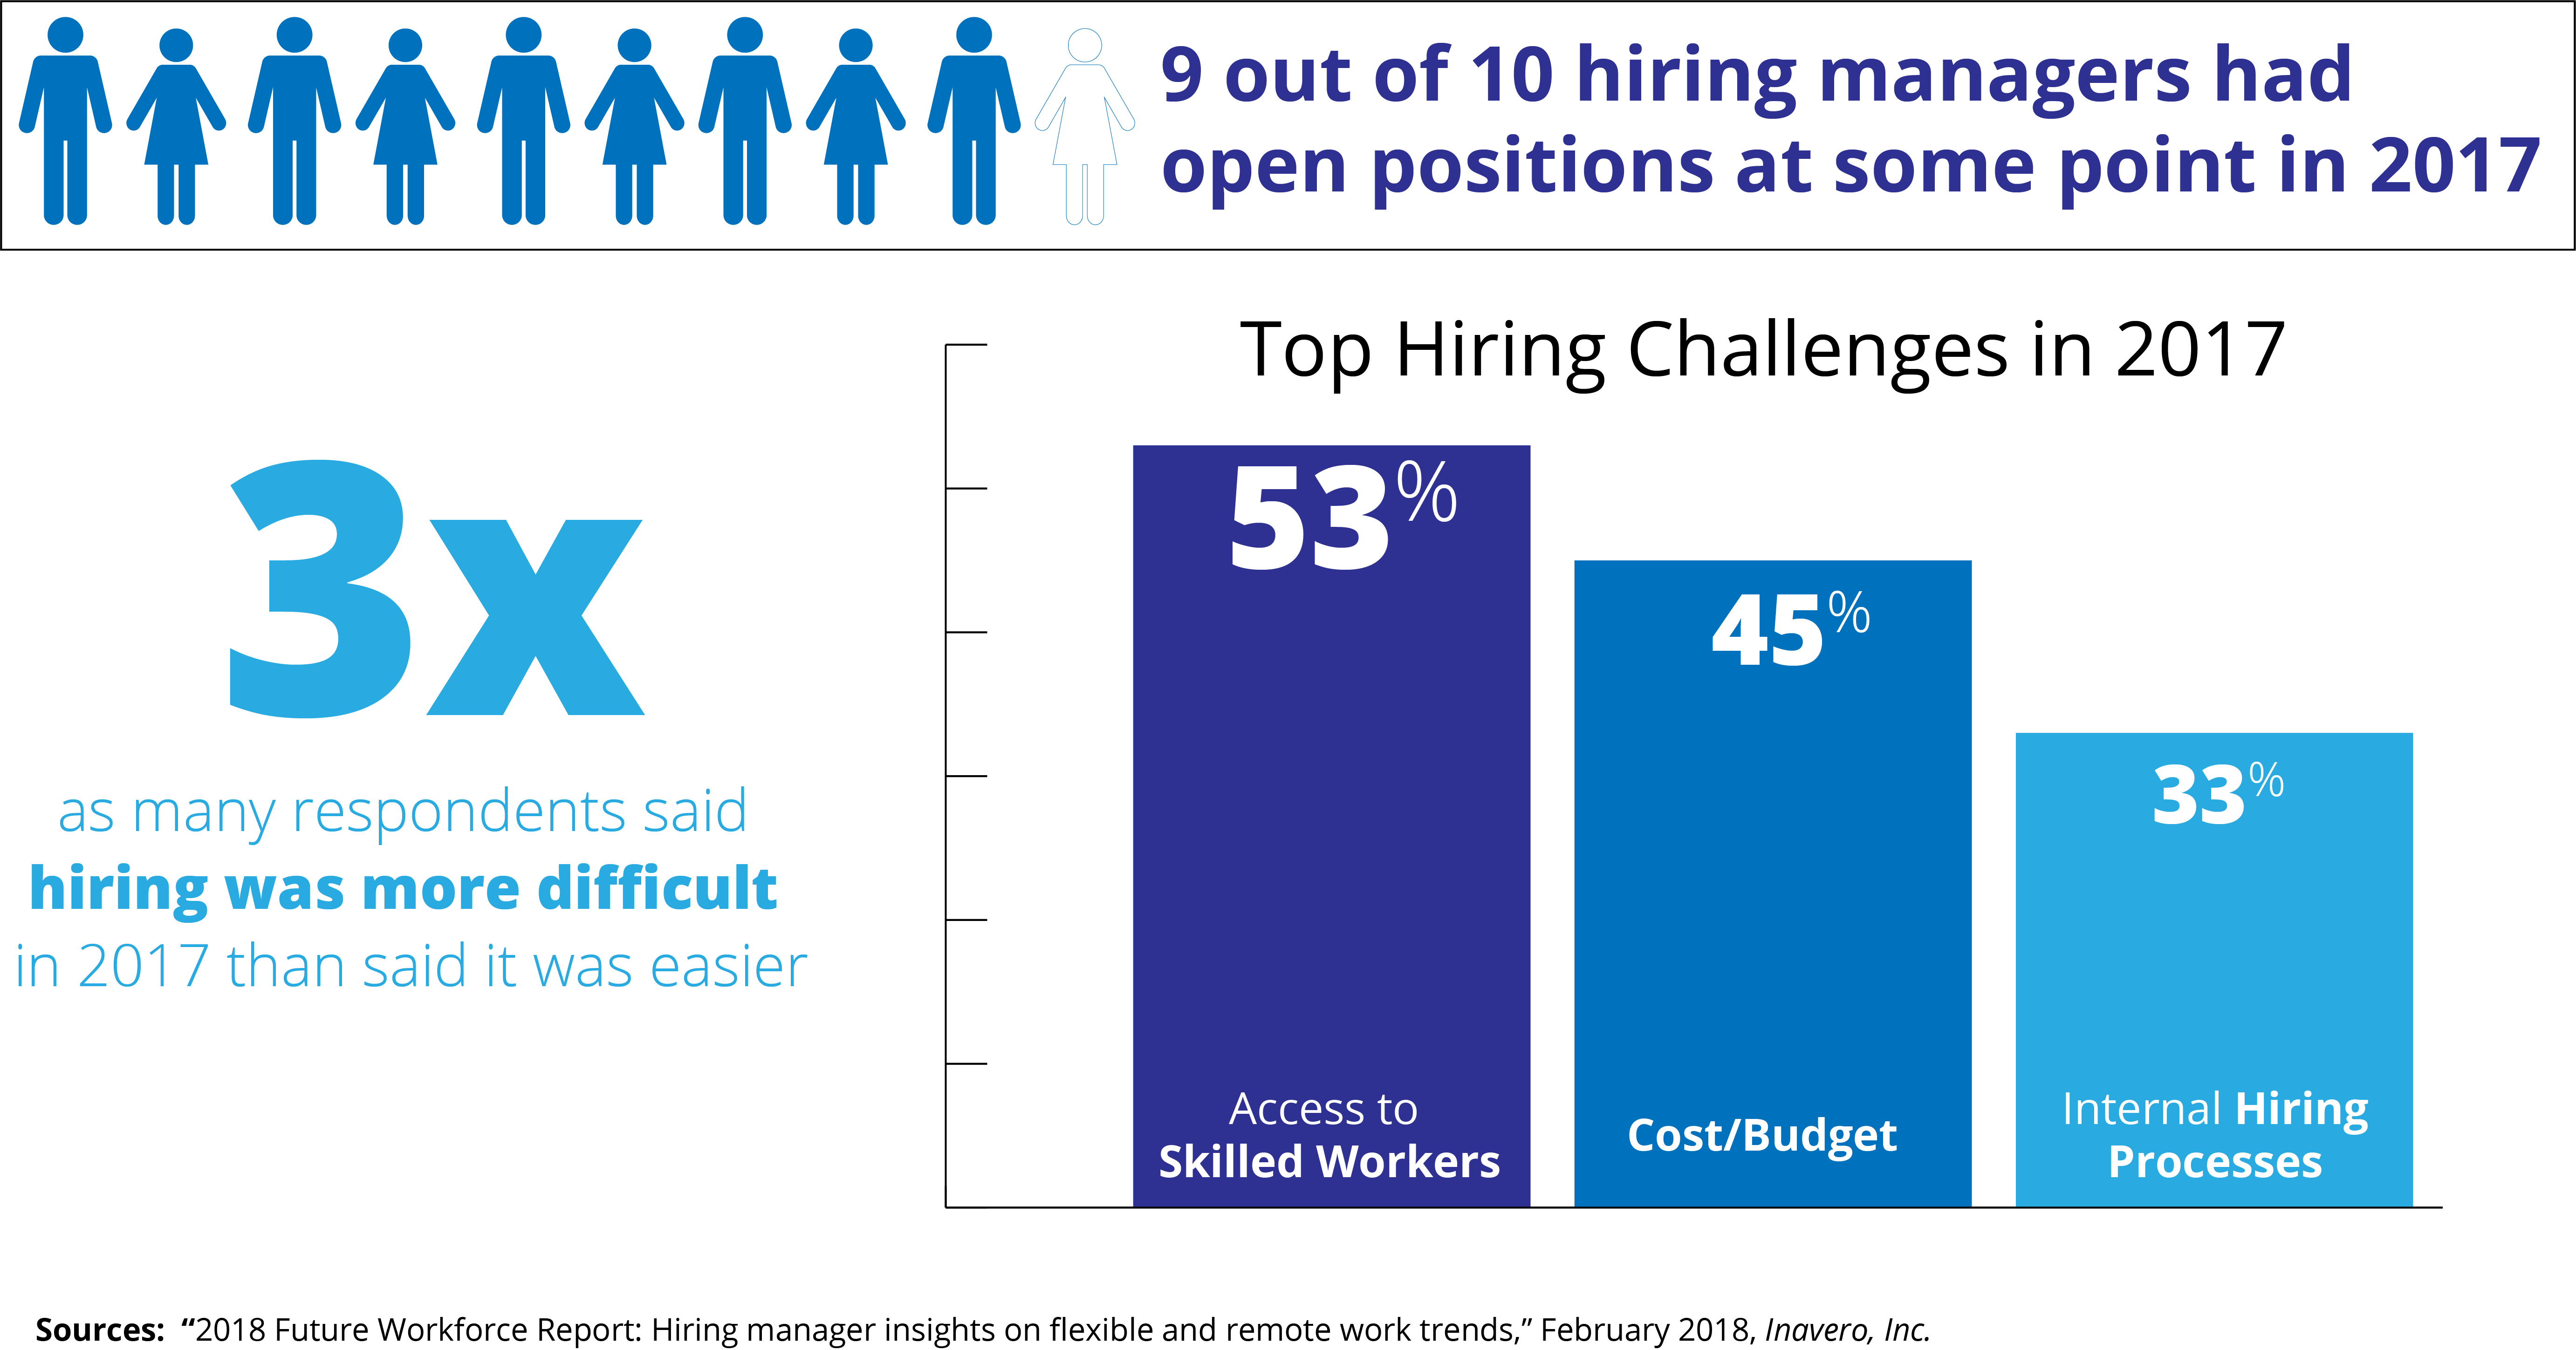 Challenges for Hiring Managers